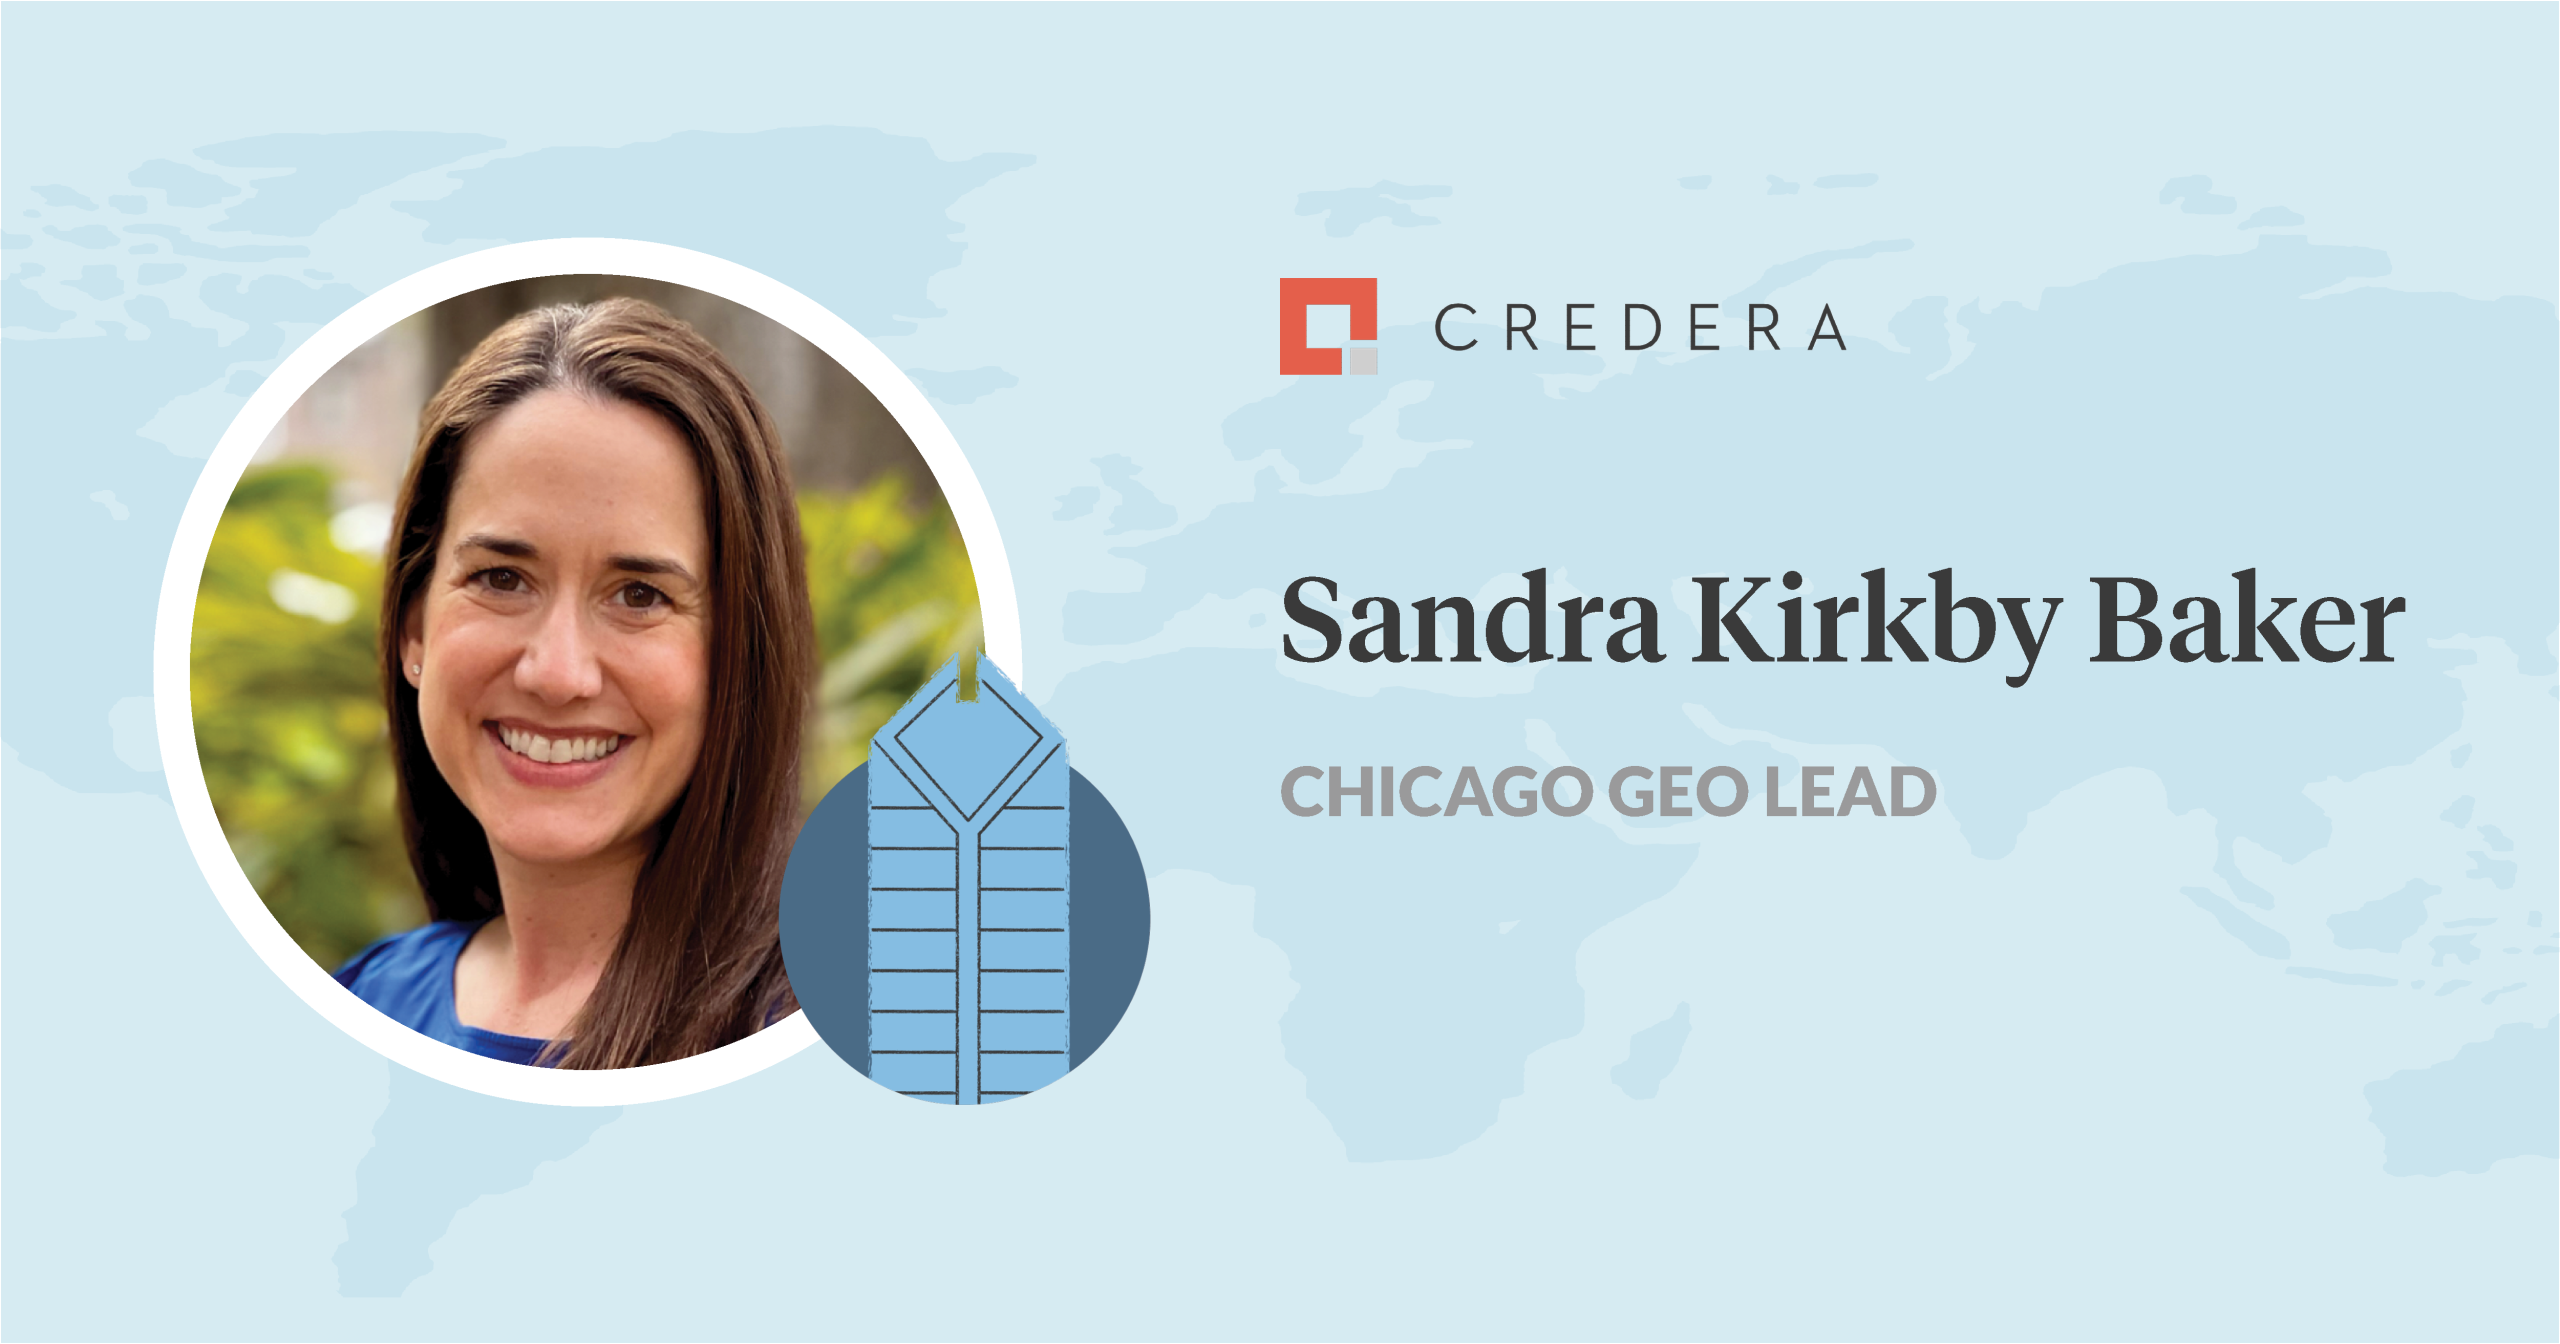 Q&A With Sandy Kirkby Baker: Geography Lead, Chicago